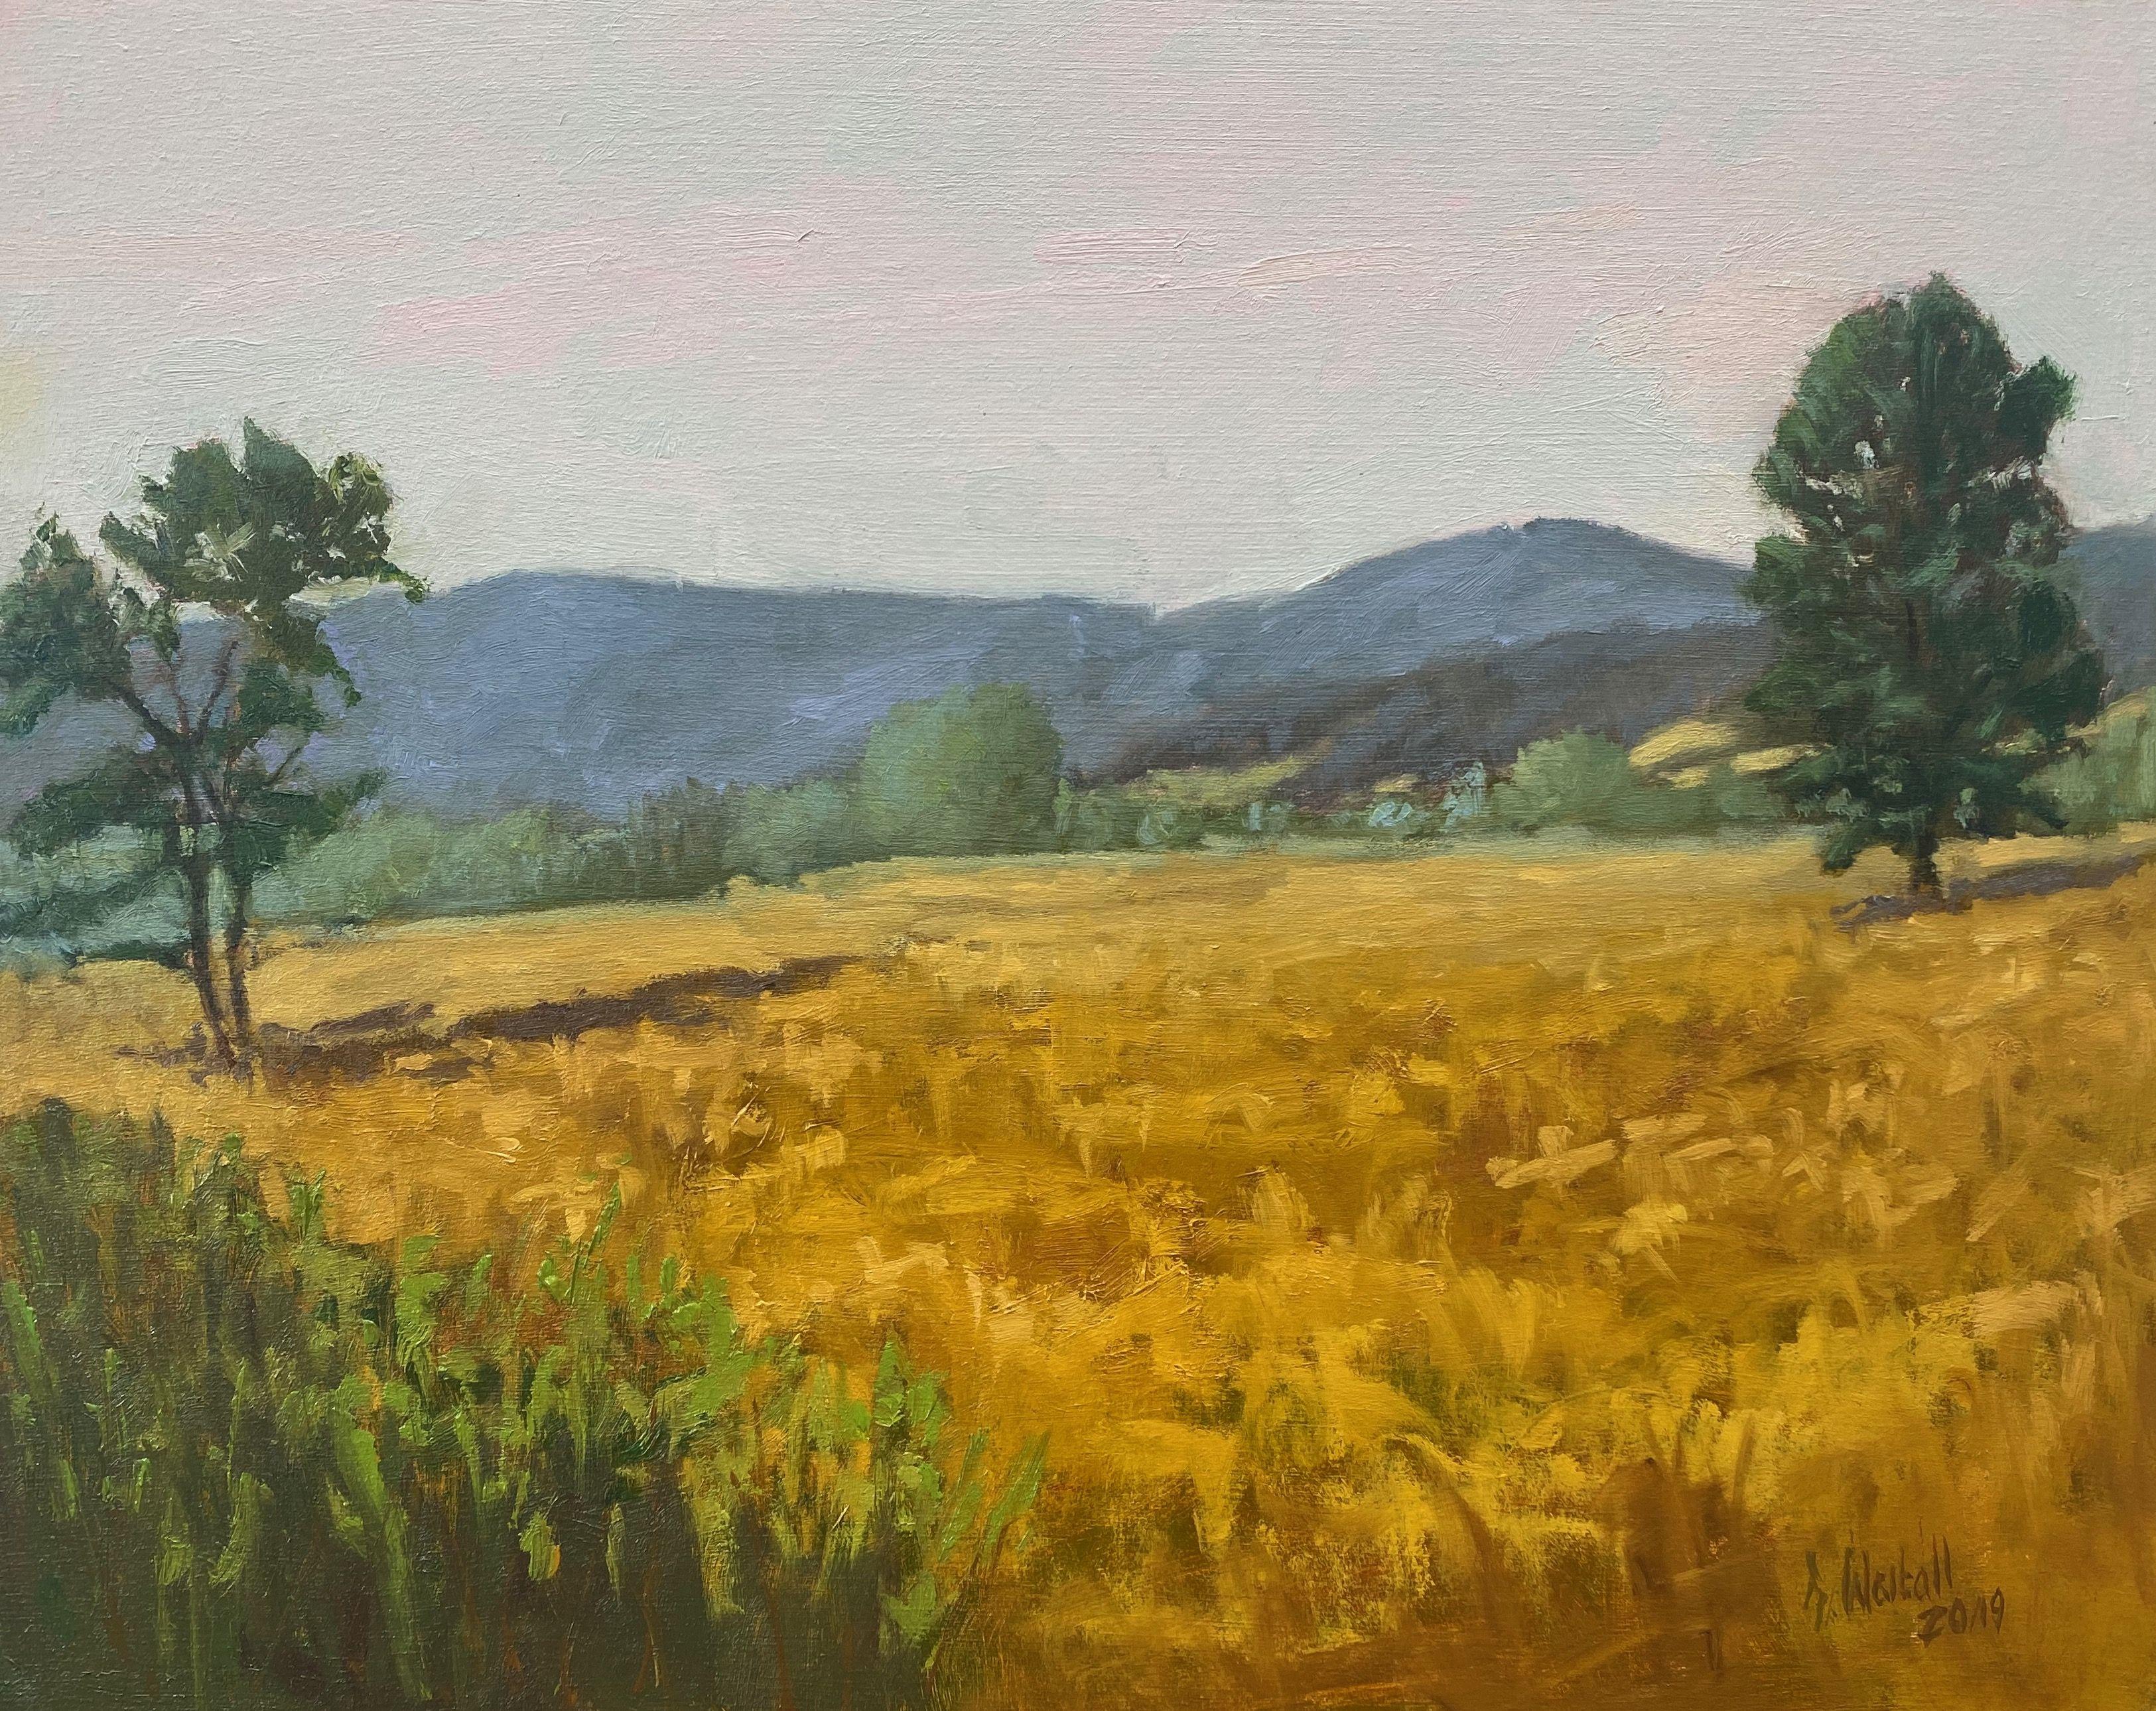 Painted Plein air in the nearby Moor. The color of the grass caught my eye, it seemed to be framed by the Pine trees. :: Painting :: Impressionist :: This piece comes with an official certificate of authenticity signed by the artist :: Ready to